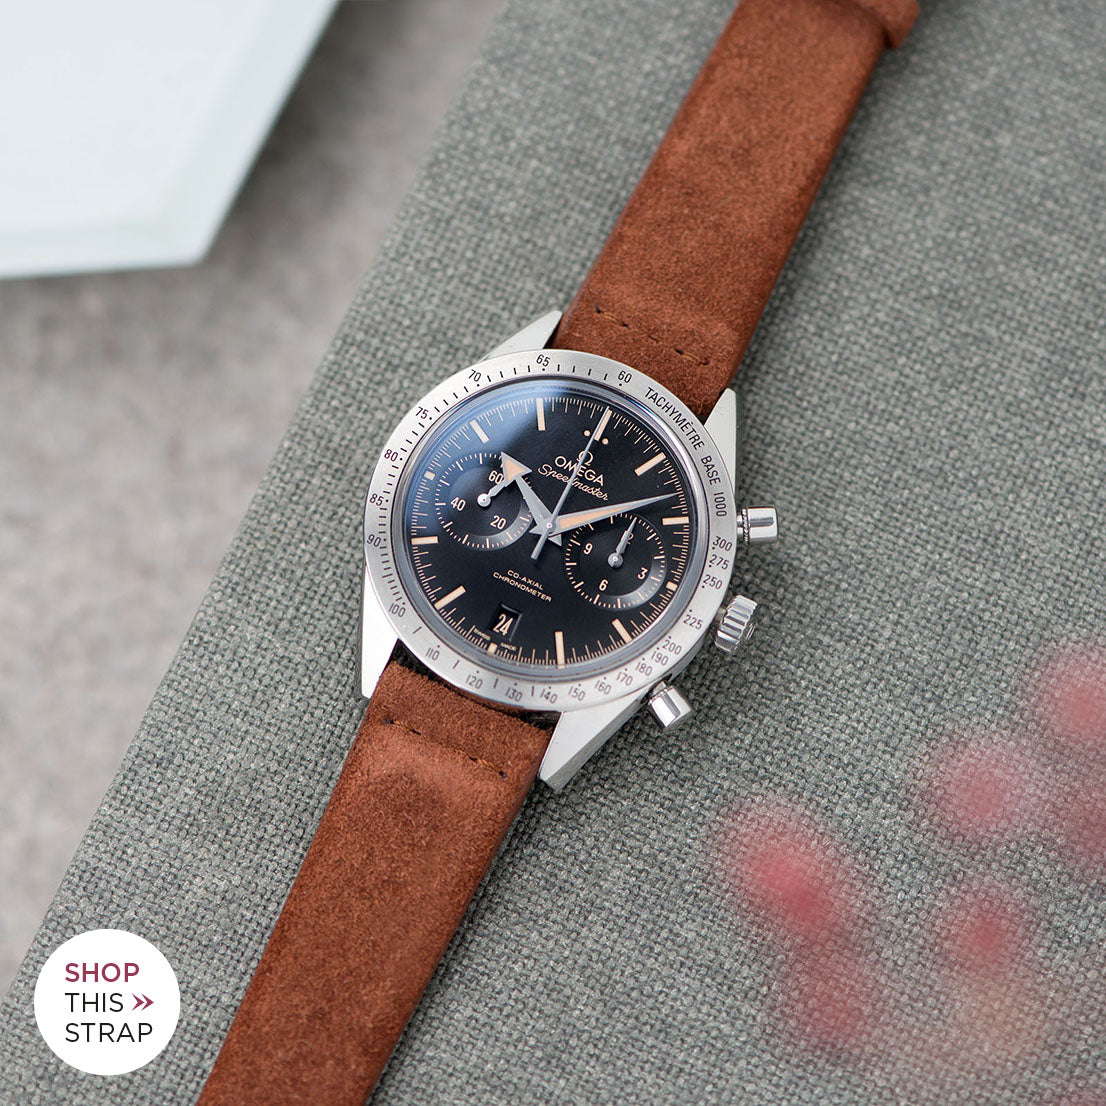 Bulang and Sons_Strap Guide_The Omega Speedmaster ’57 Co-Axial Chronograph_Cognac Brown Silky Suede Leather Watch Strap